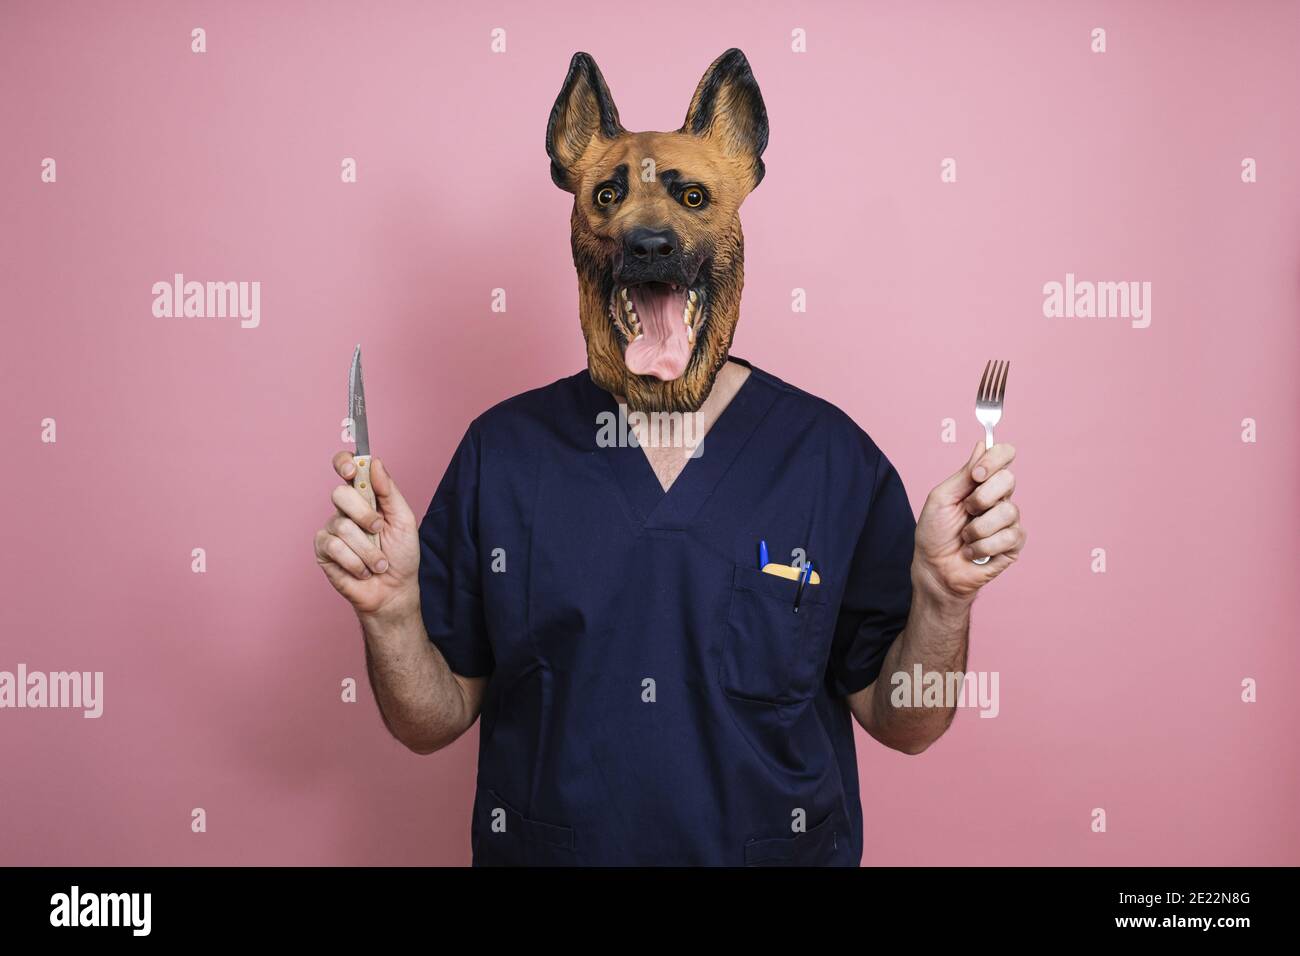 https://c8.alamy.com/comp/2E22N8G/young-man-in-a-latex-dog-head-mask-holding-a-fork-and-a-knife-on-a-pink-background-2E22N8G.jpg